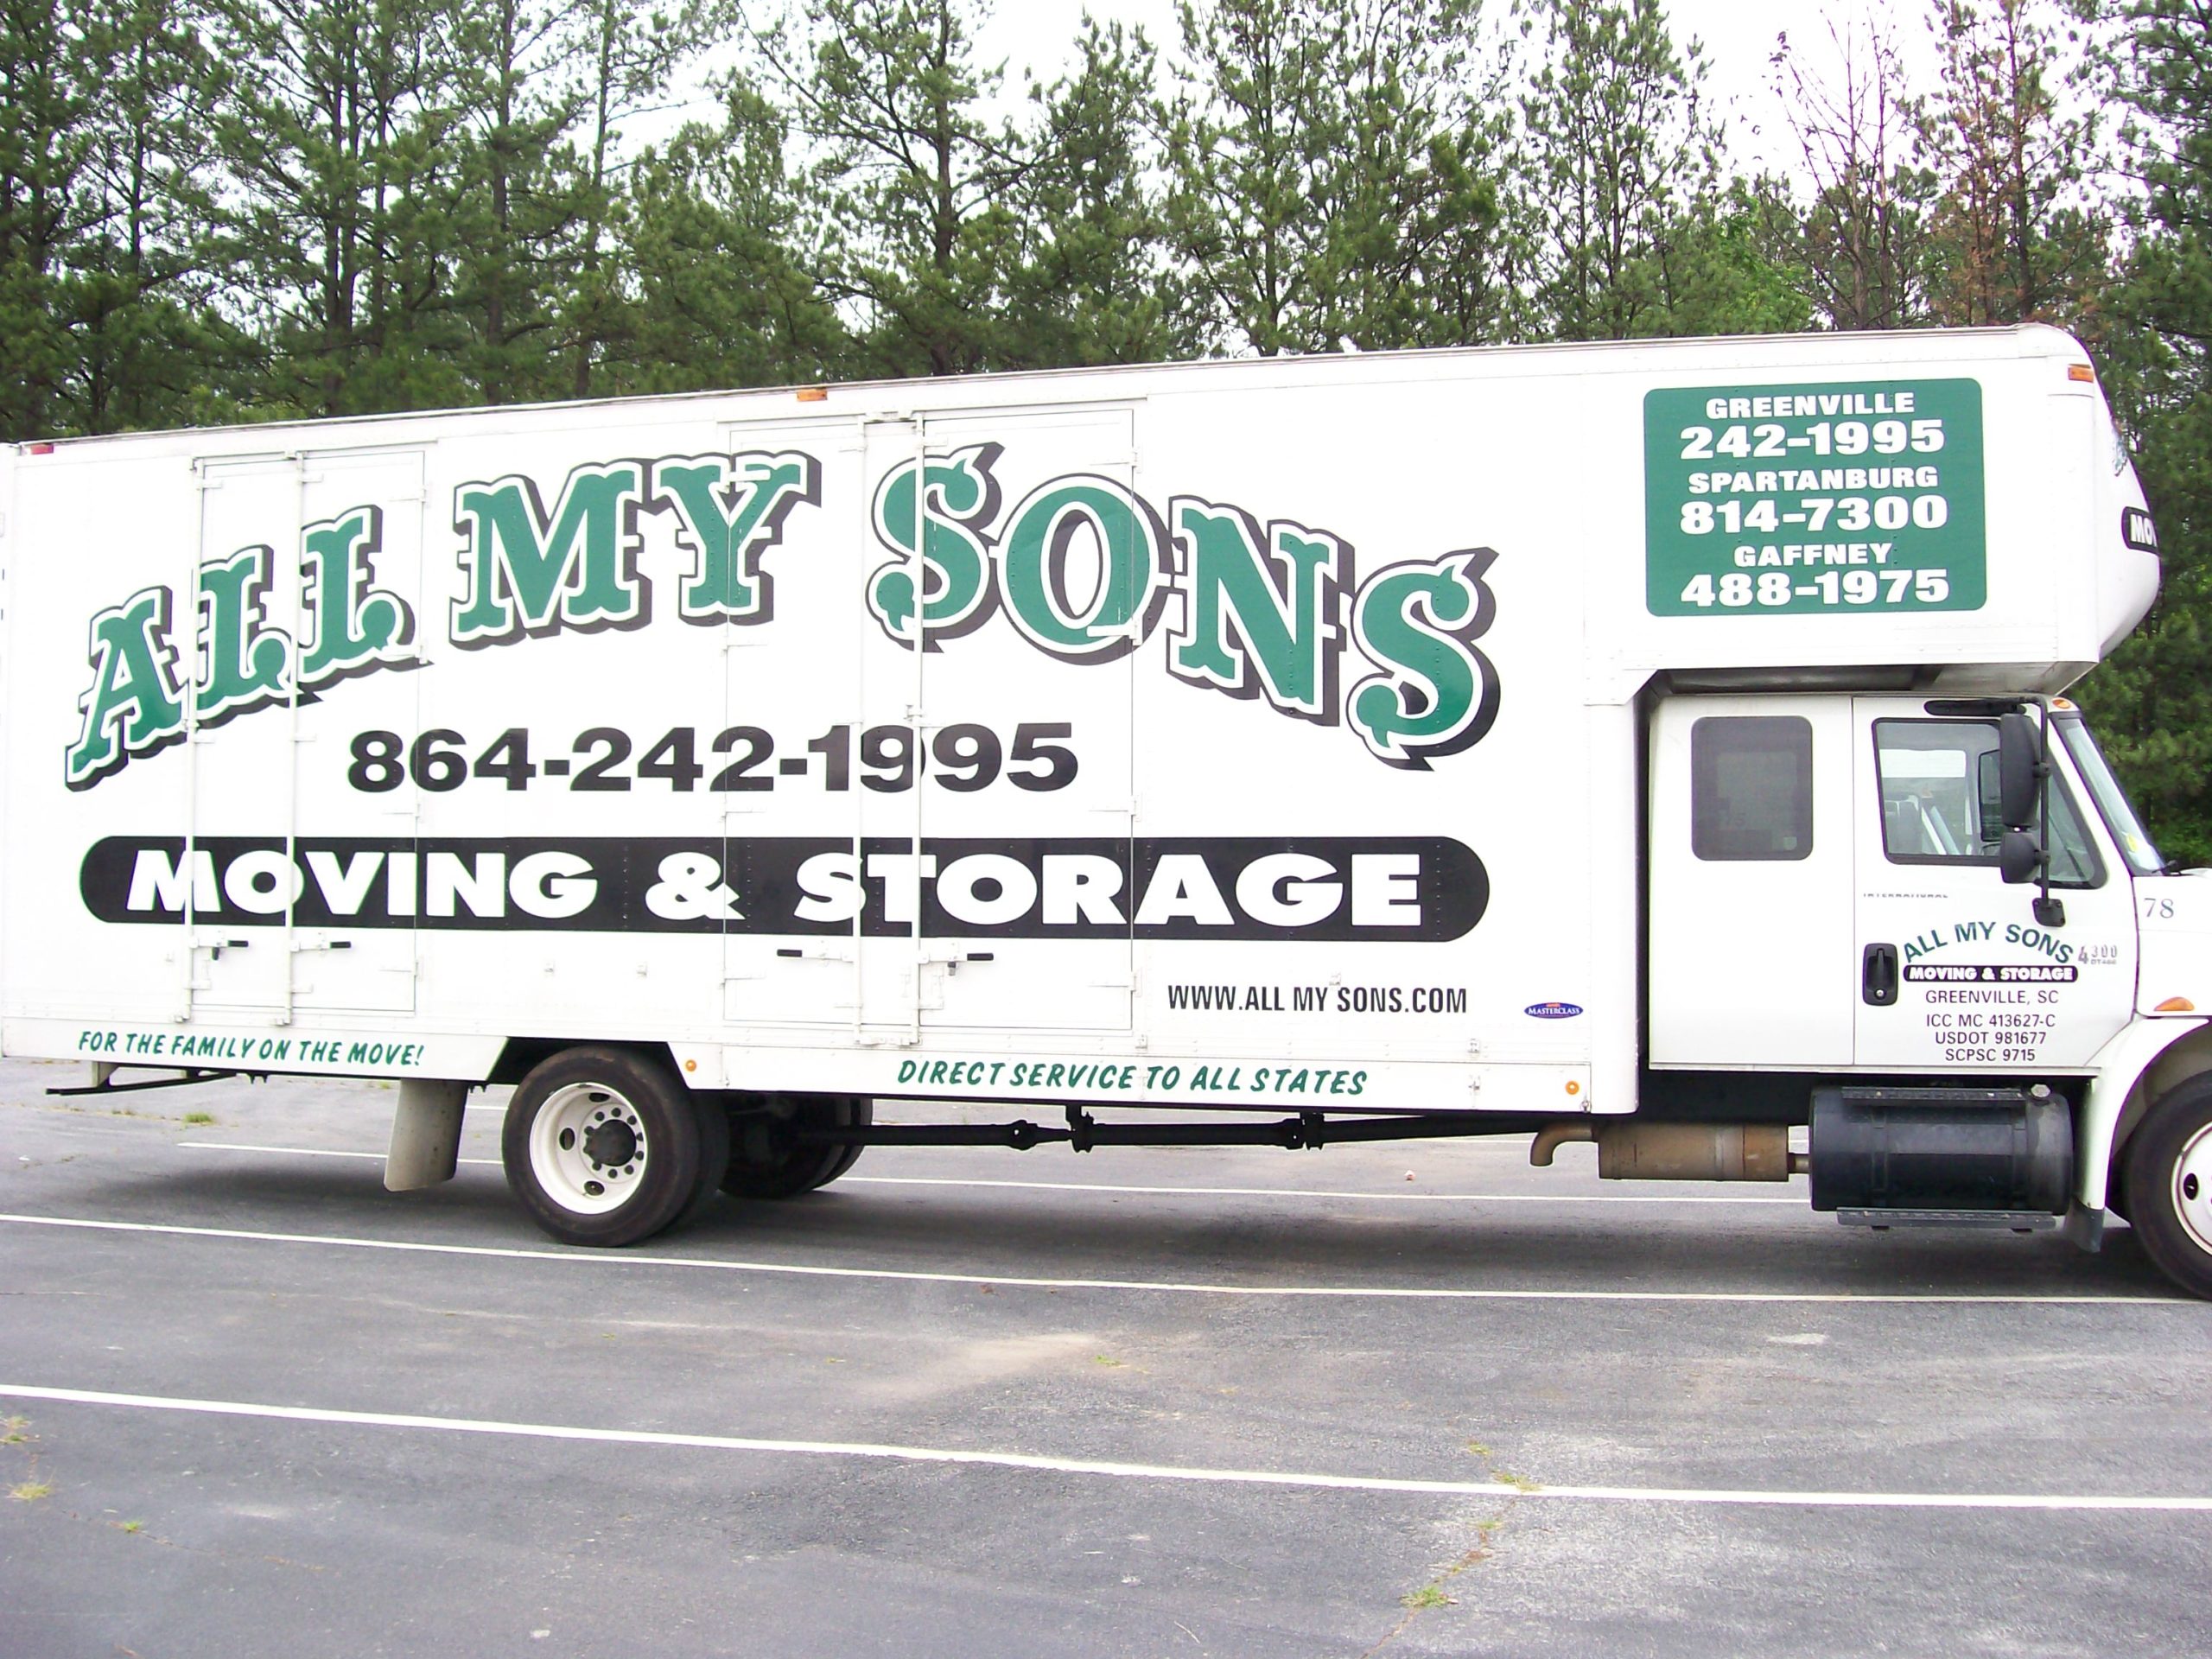 Why Do We Recommend All My Sons Moving and Storage?